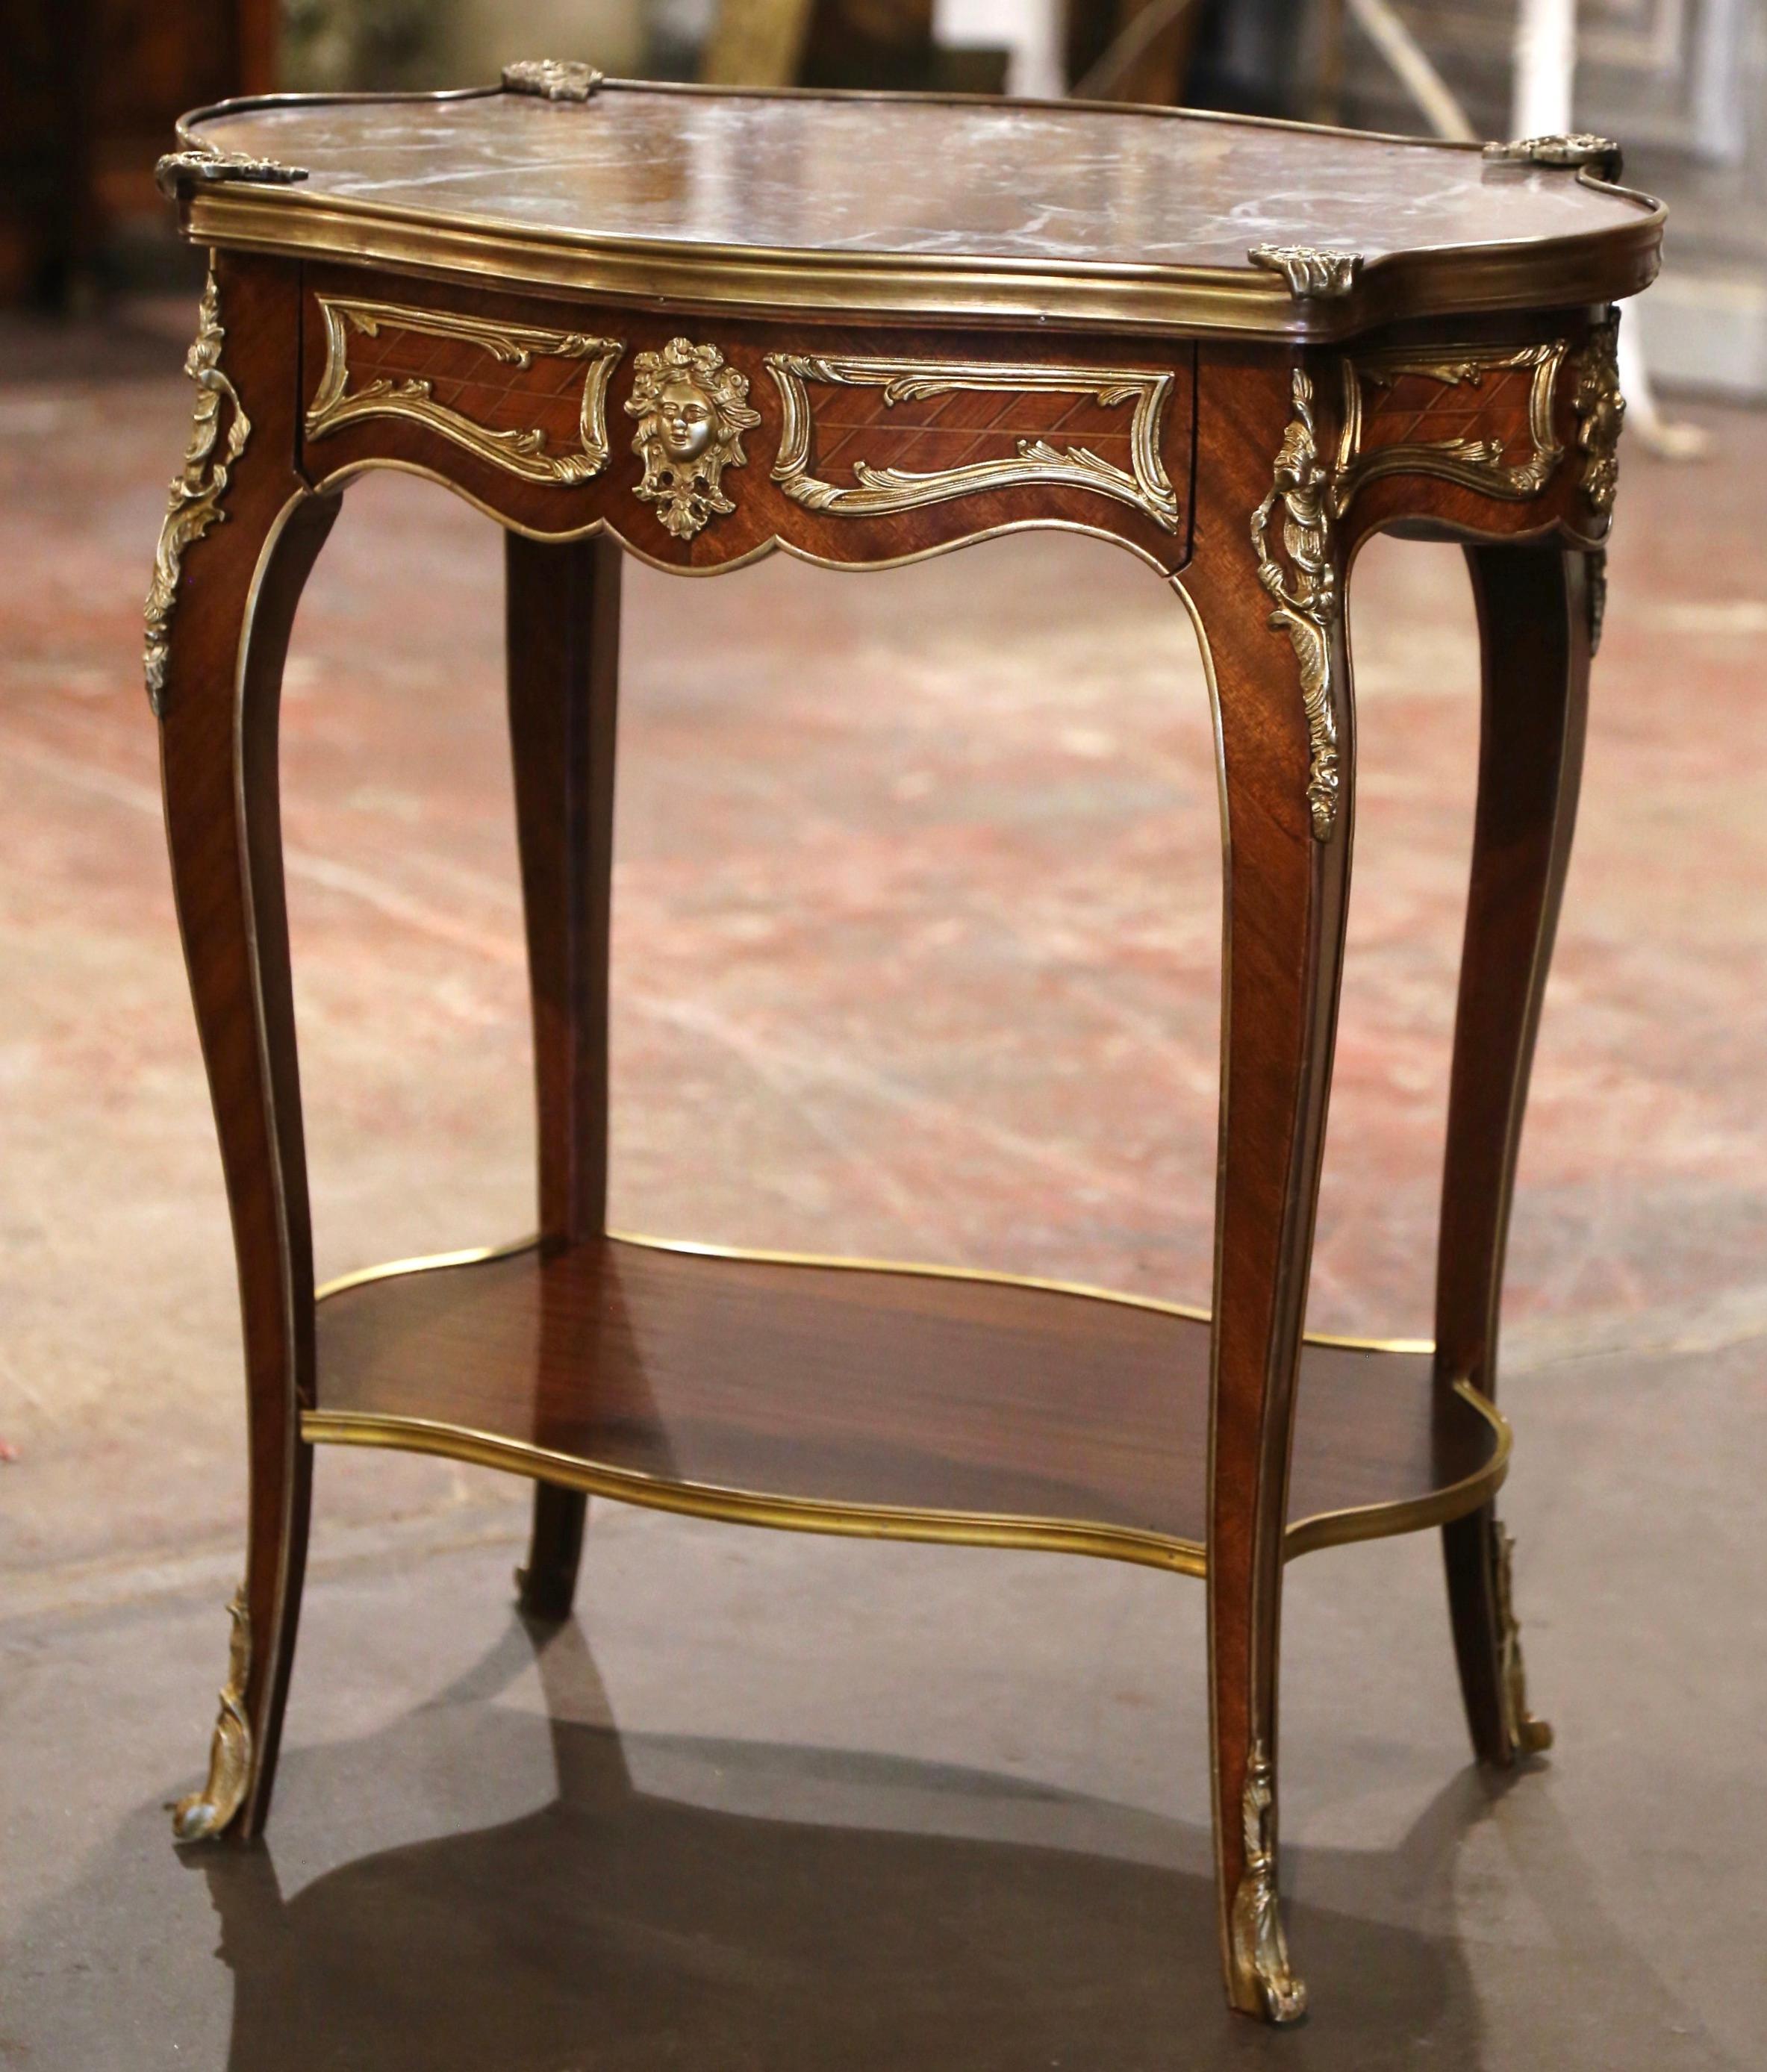 Decorate an entry or hallway with this elegant antique side table. Crafted in France circa 1920 and built of walnut with ormolu embellishments, the classic cabinet exemplifies the Louis XV style with a heavy presence, dramatic lines and beautiful